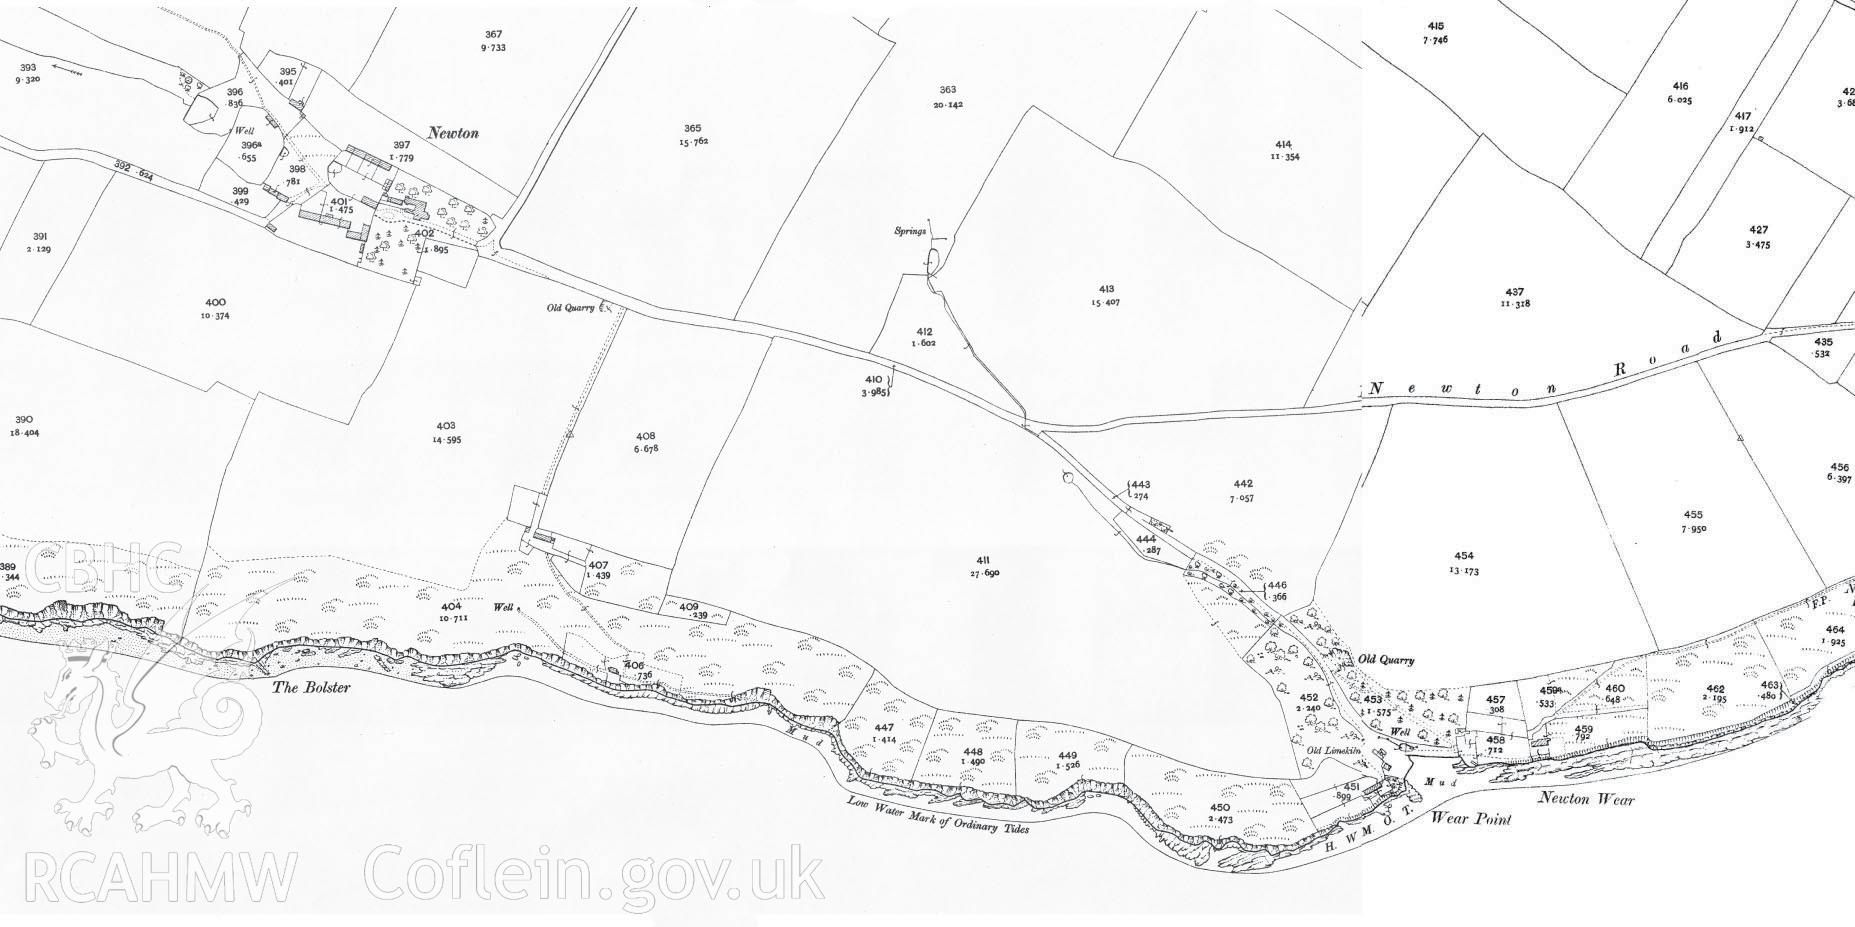 Digital copy of part of an OS map, showing the assesment area.